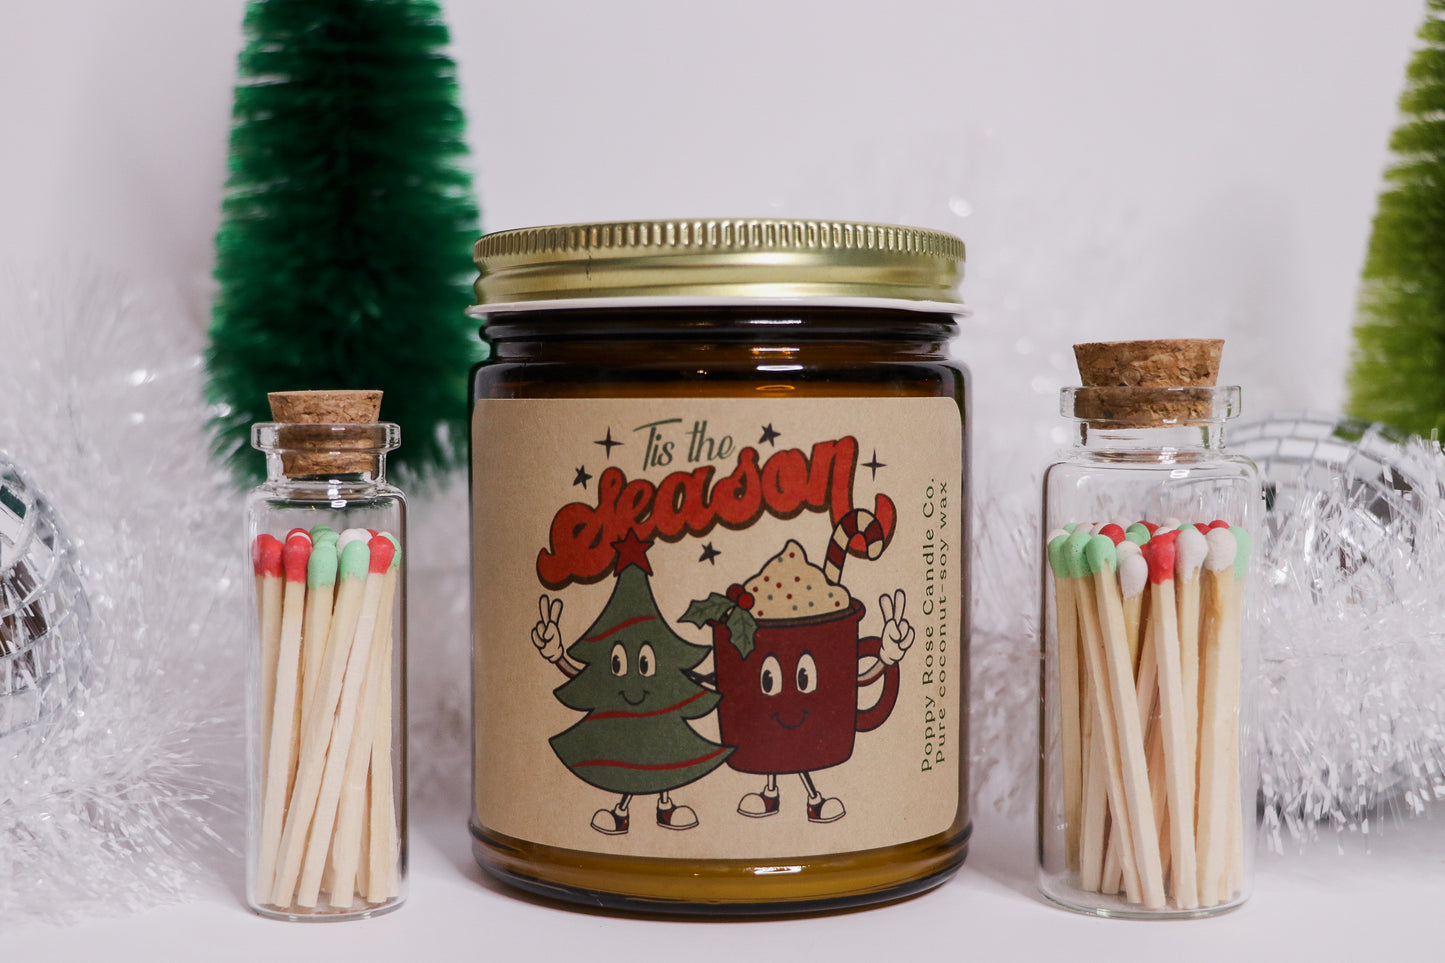 Christmassy Matches in Small Corked Vial